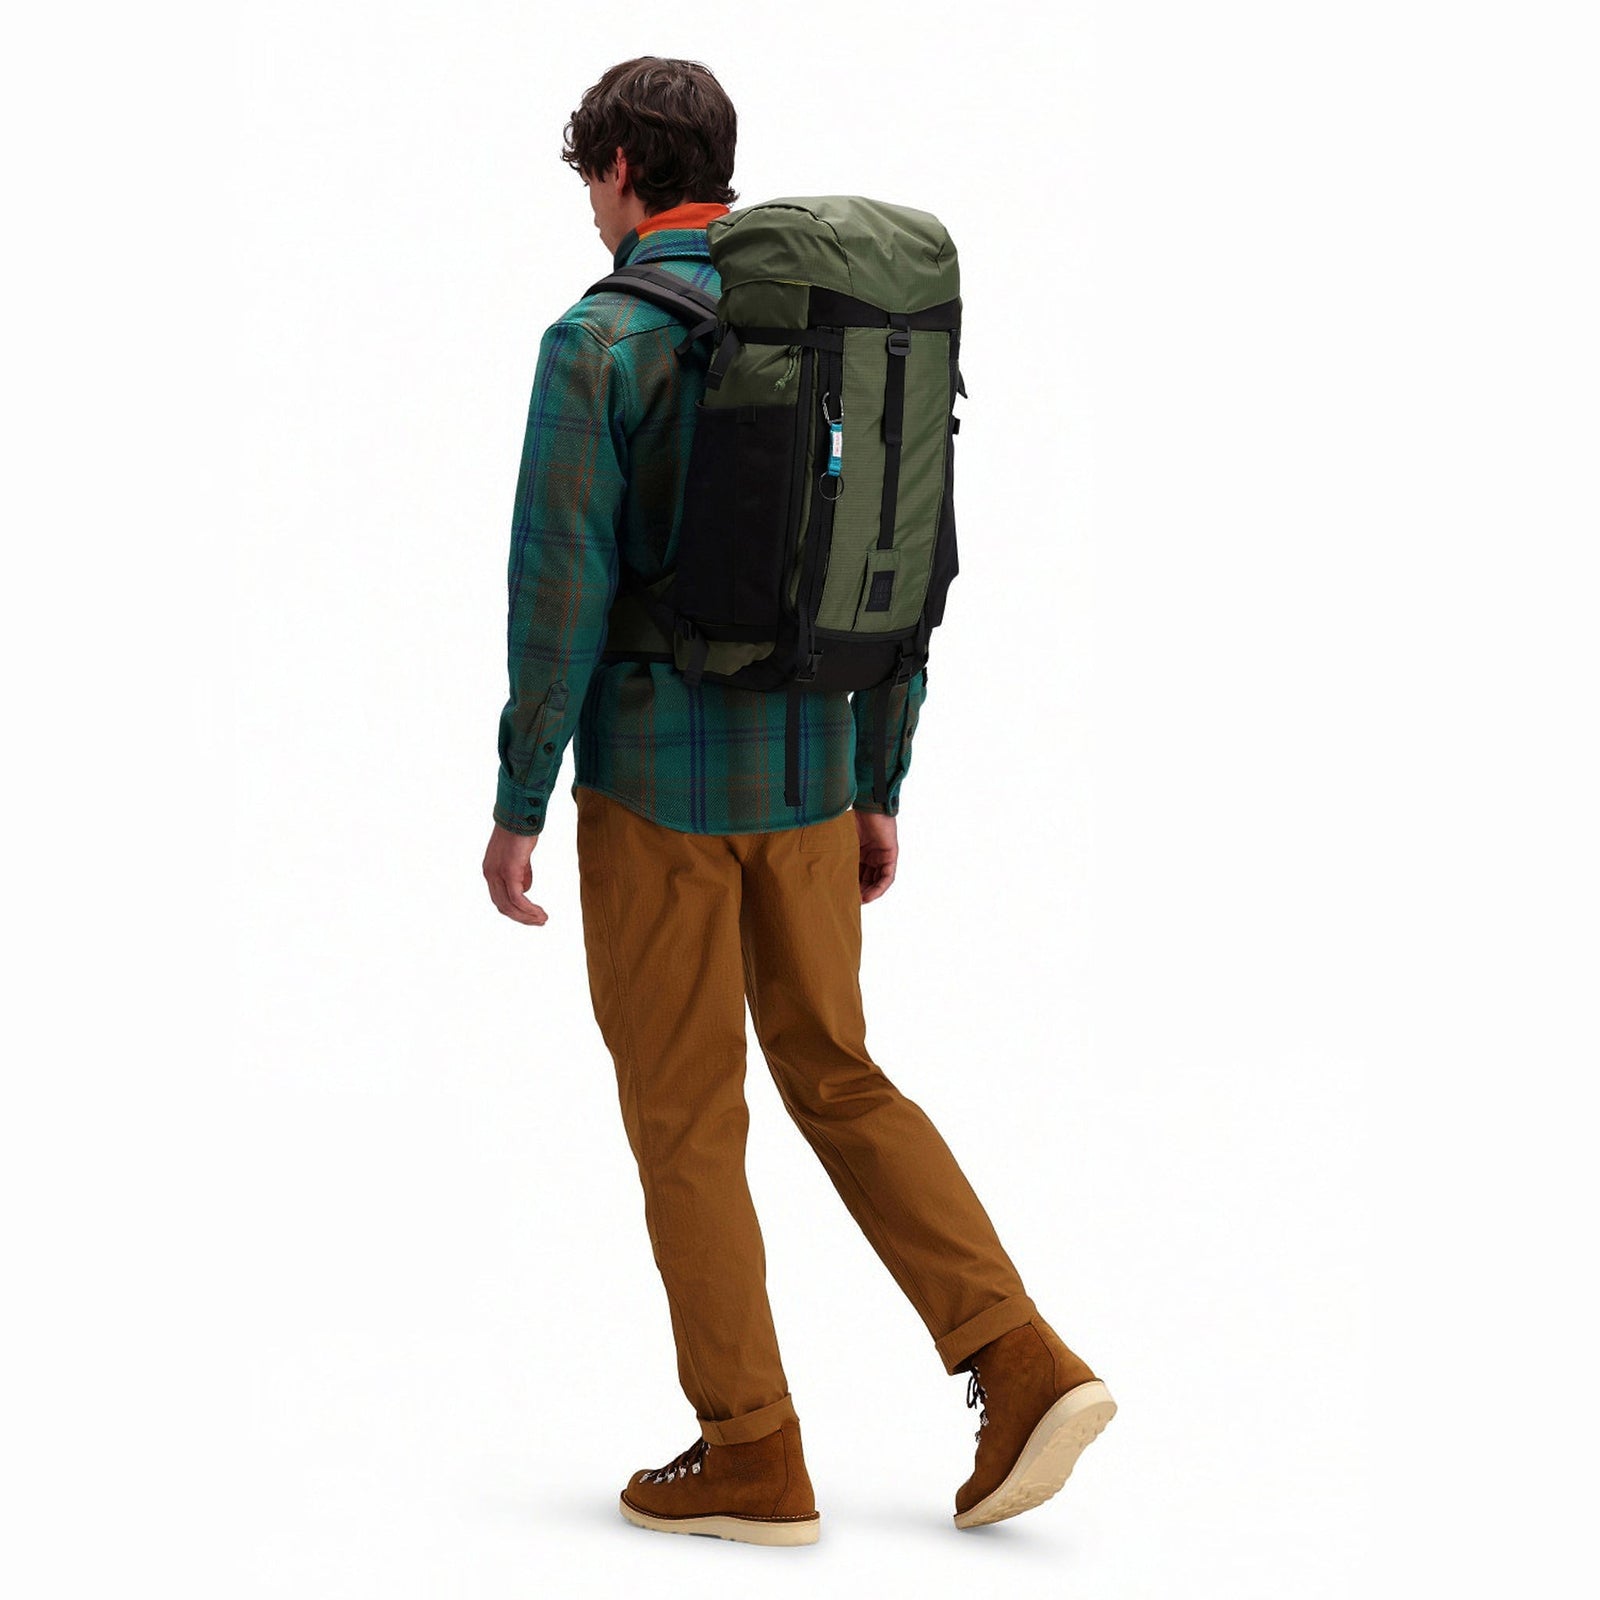 Model wearing Topo Designs Mountain Pack 28L hiking backpack with external laptop sleeve access in lightweight recycled "olive" green nylon.